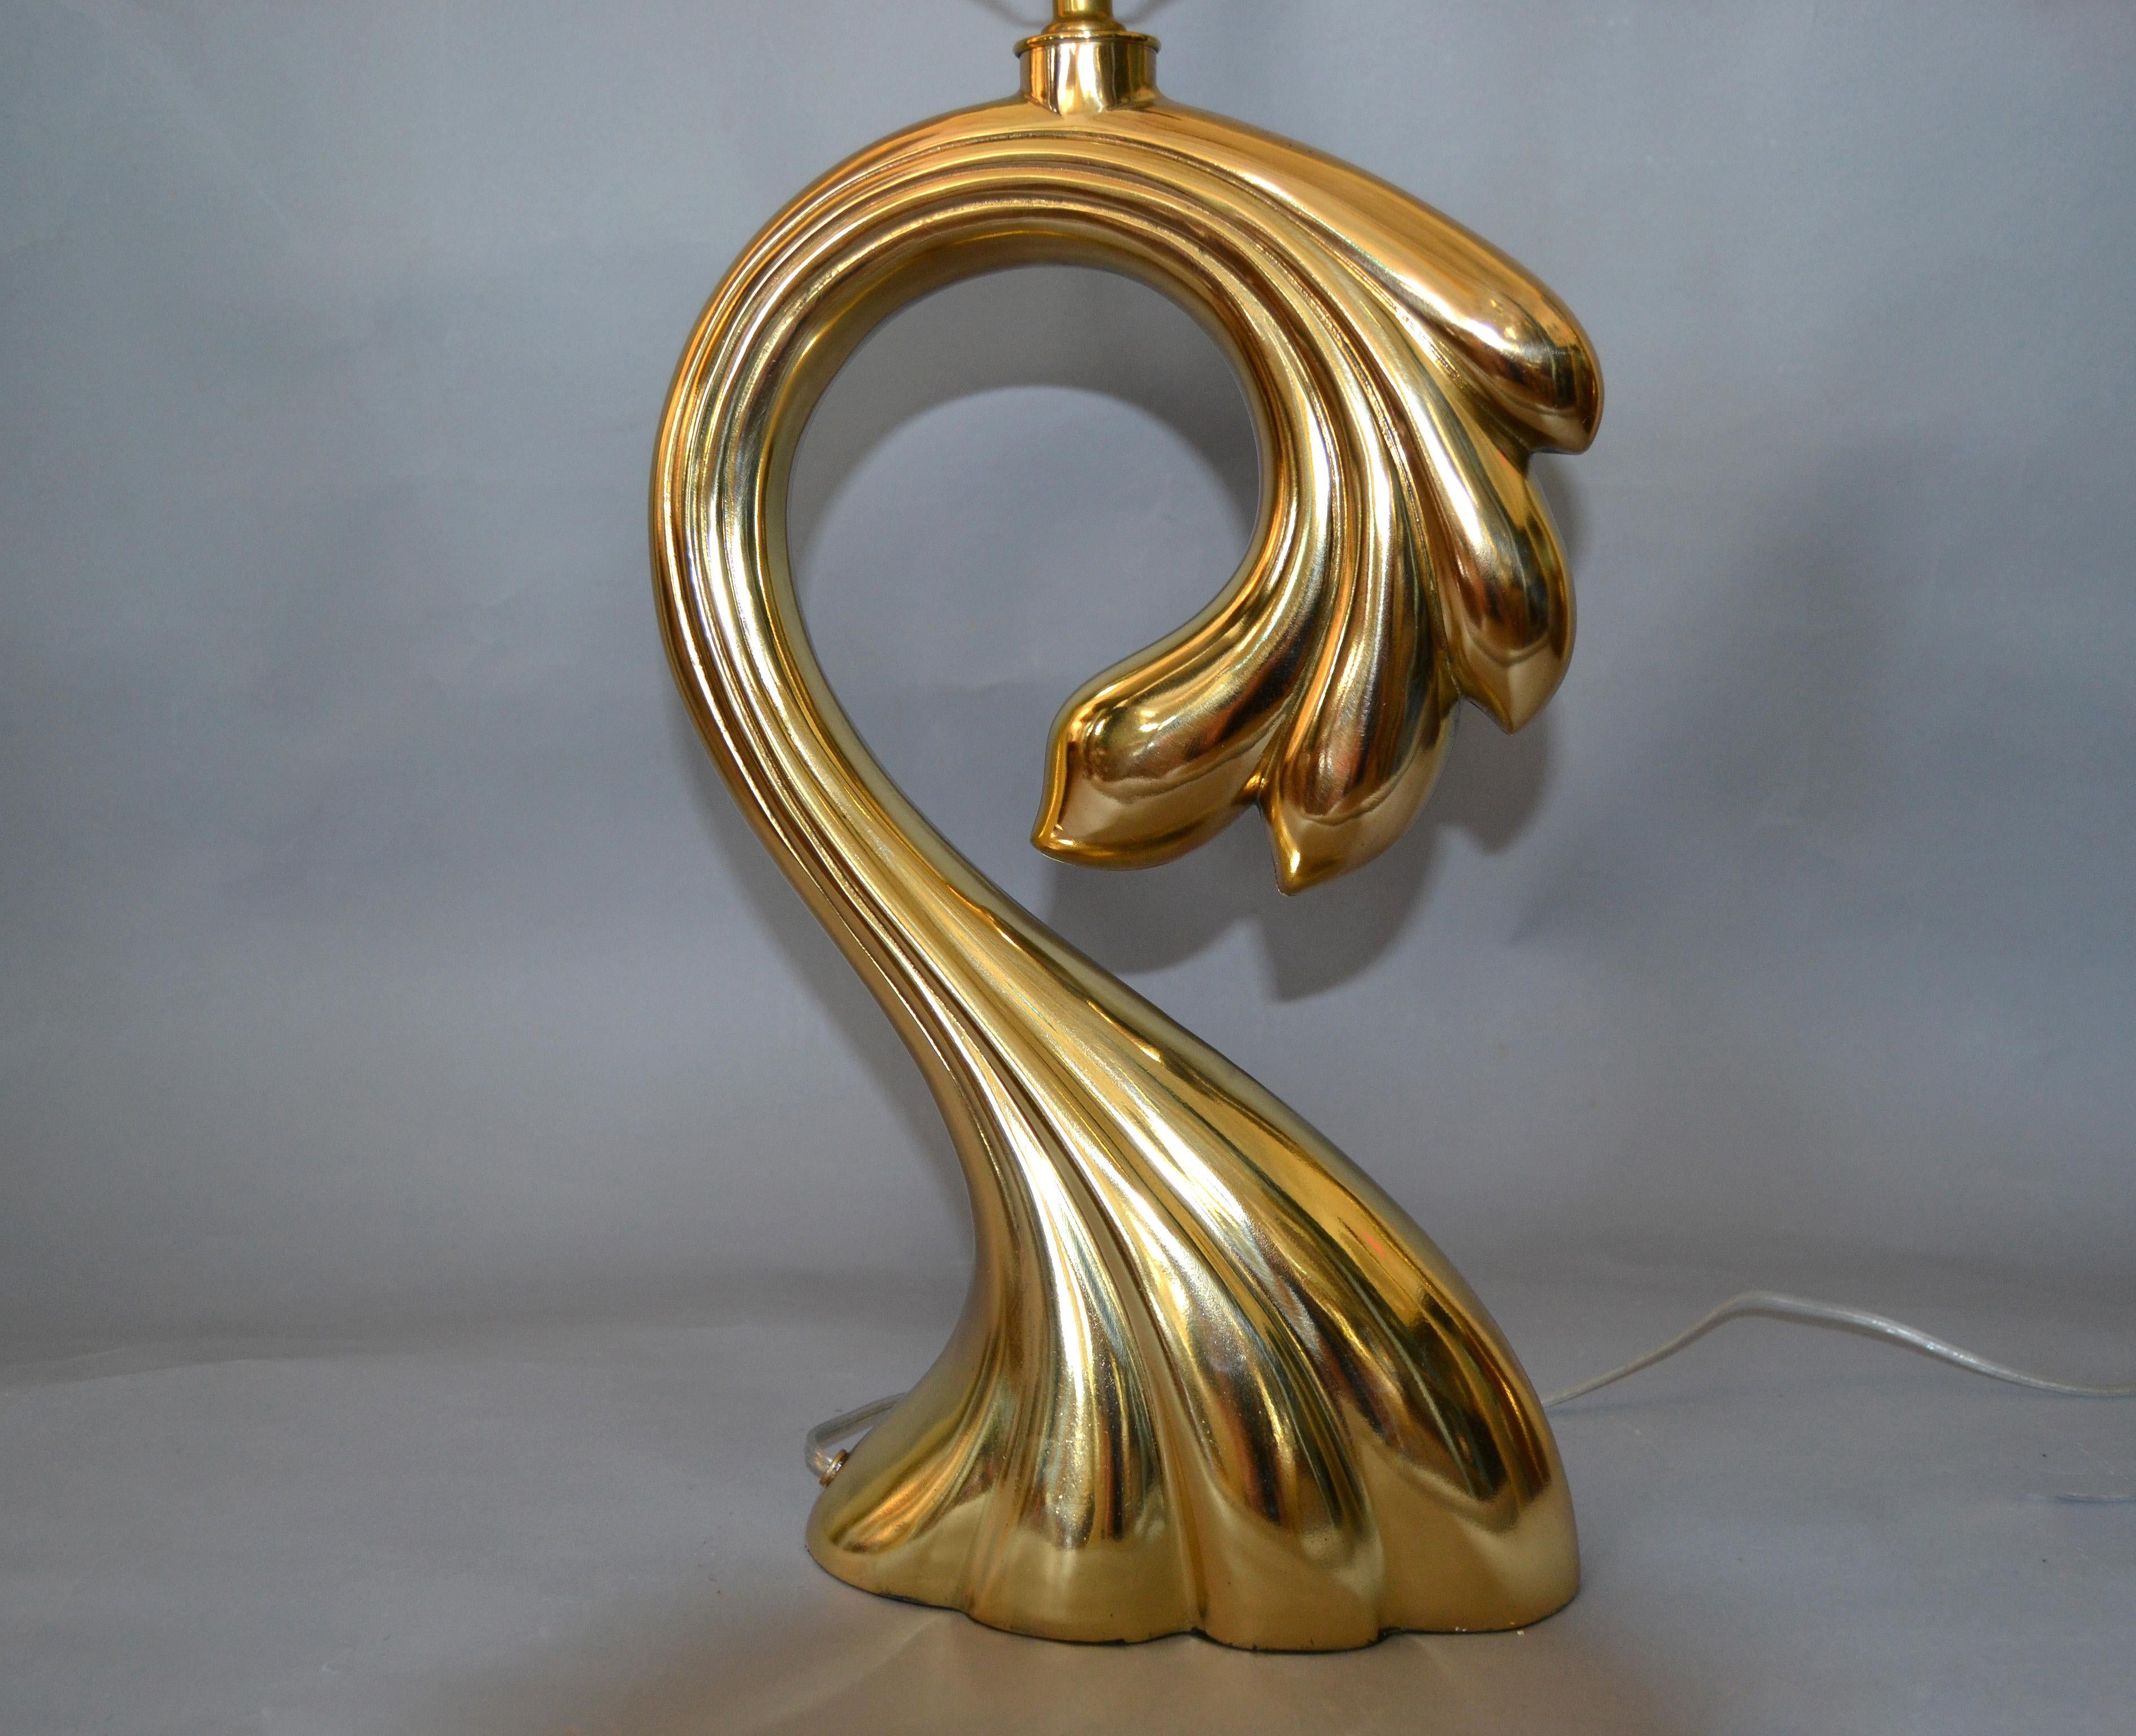 Polished Pierre Cardin Manner Sculptural Brass Table Lamp Mid-Century Modern For Sale